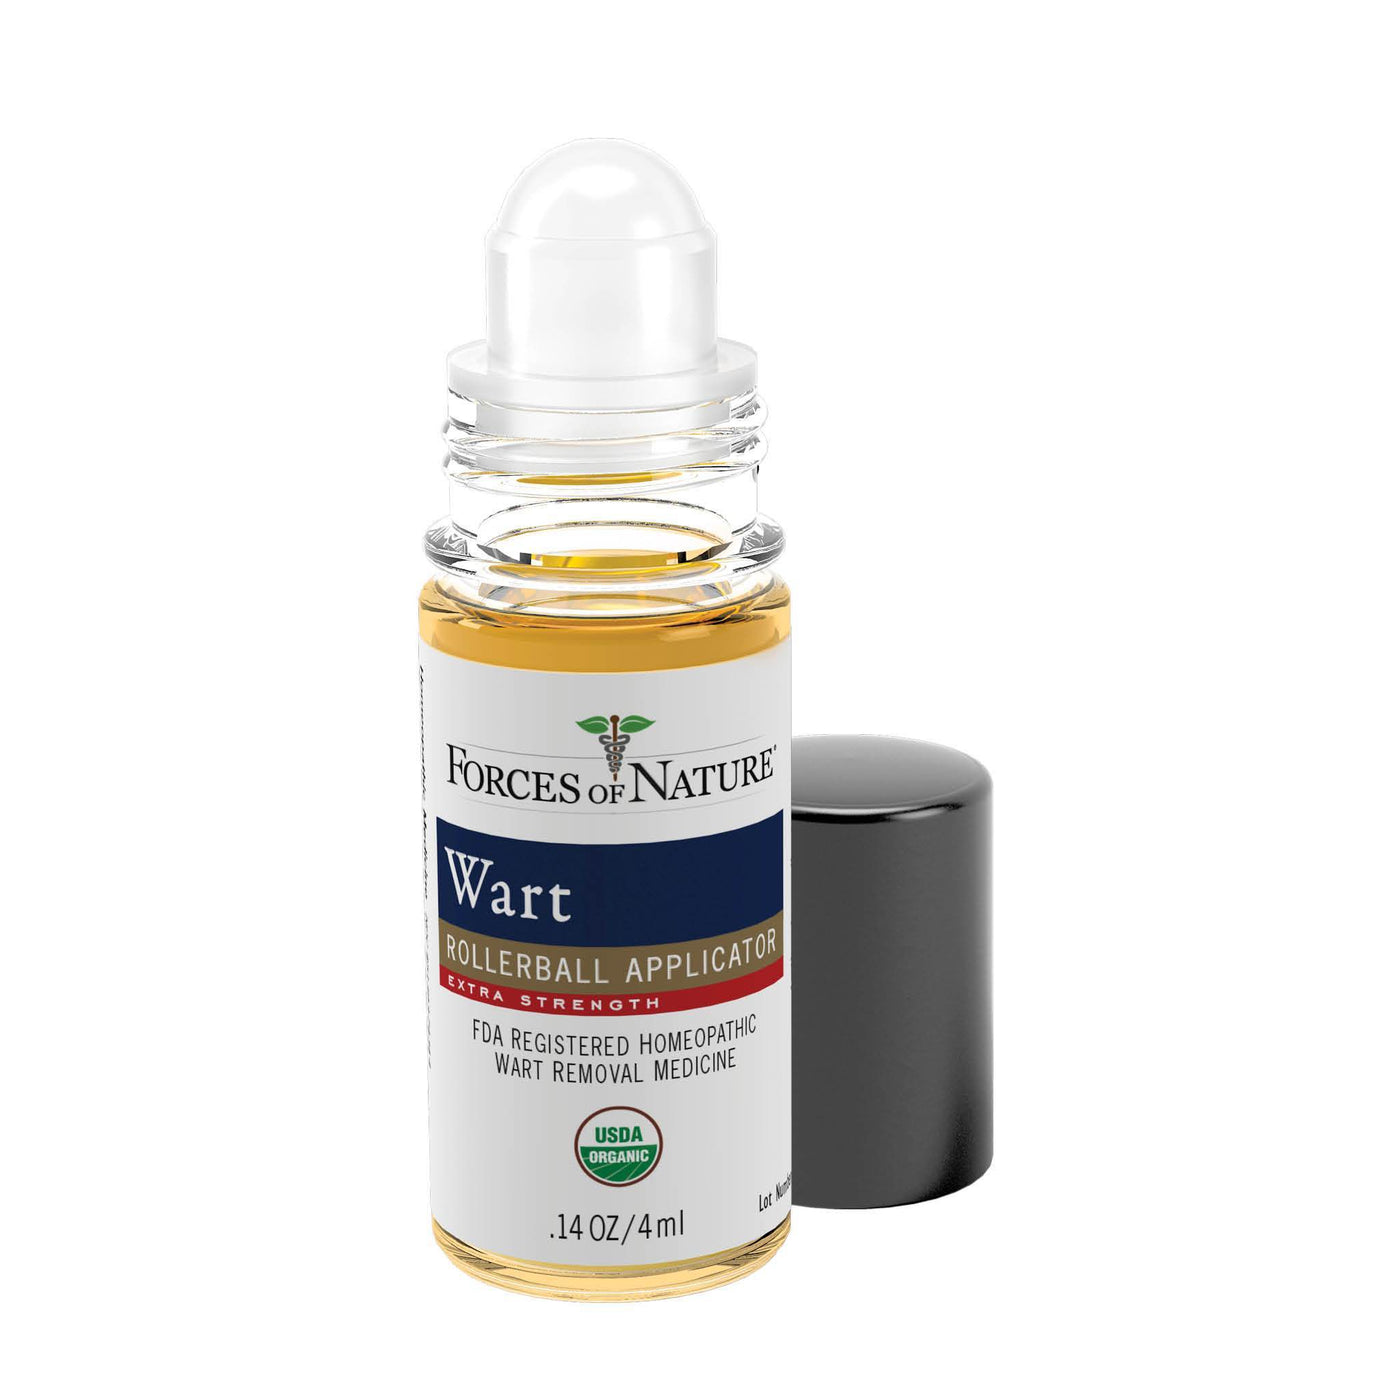 Wart Remover Extra Strength